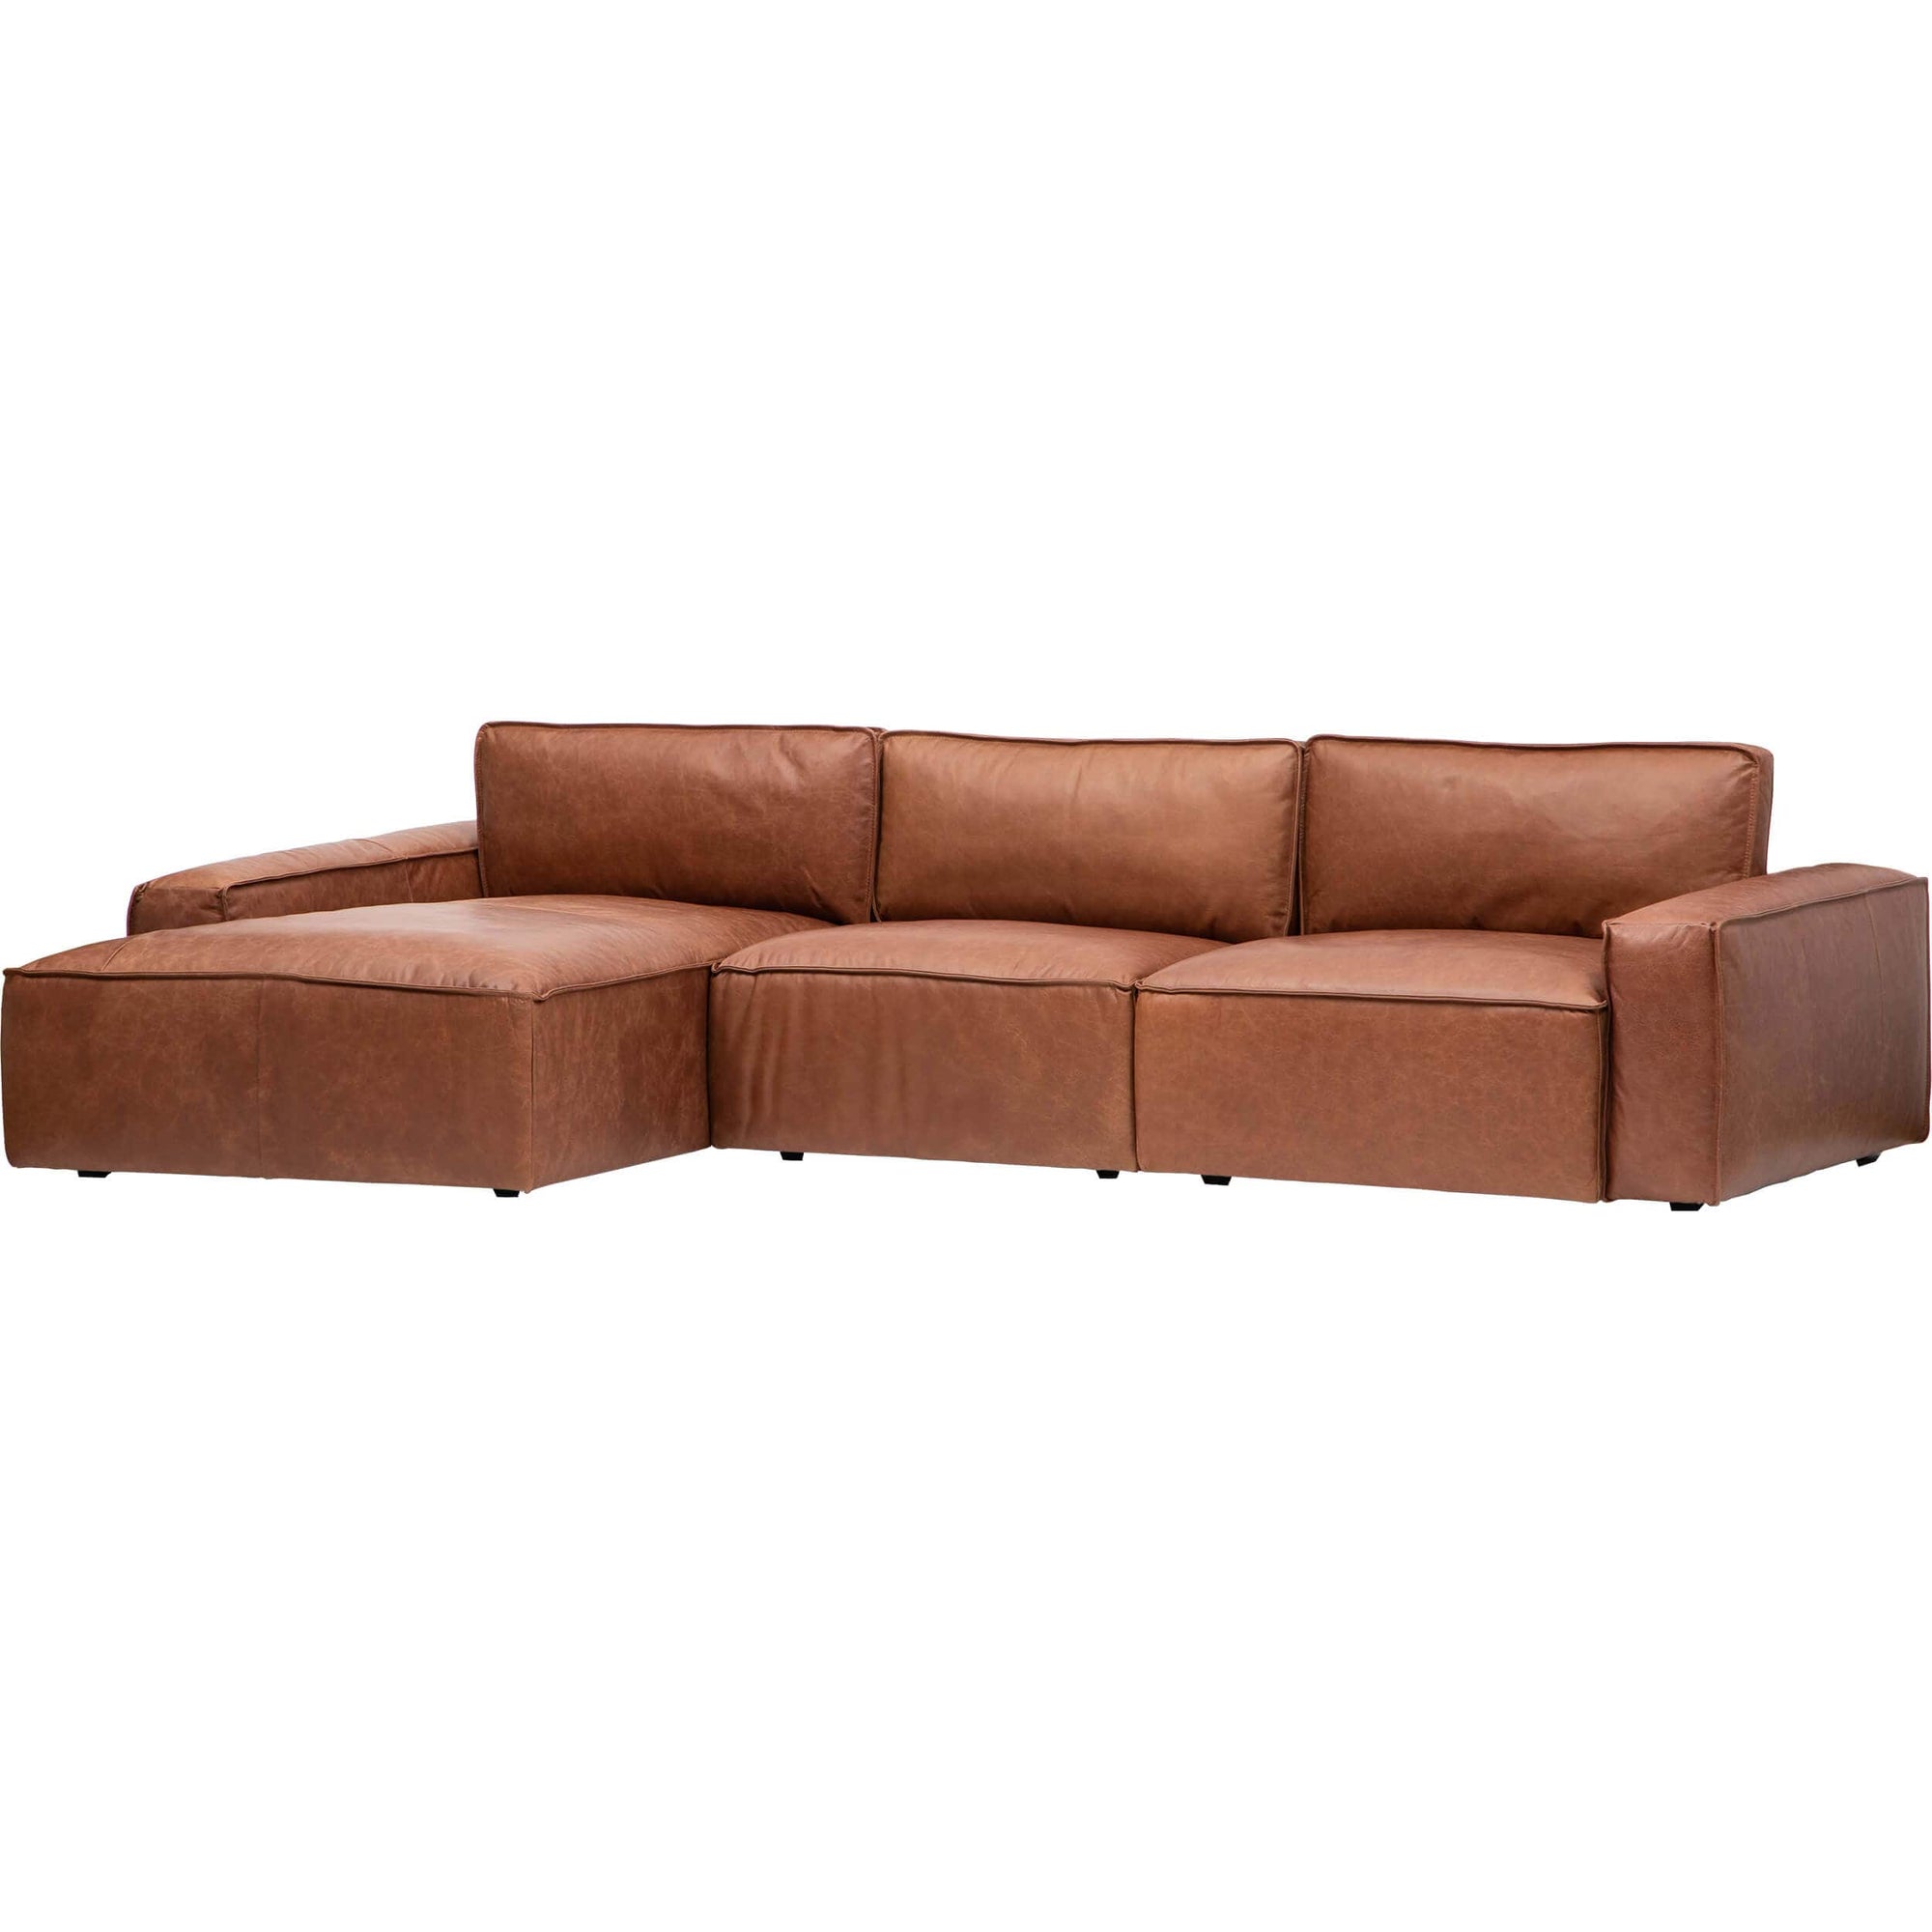 Zion Home High Leather Marseille Sectional, Carmel – Fashion